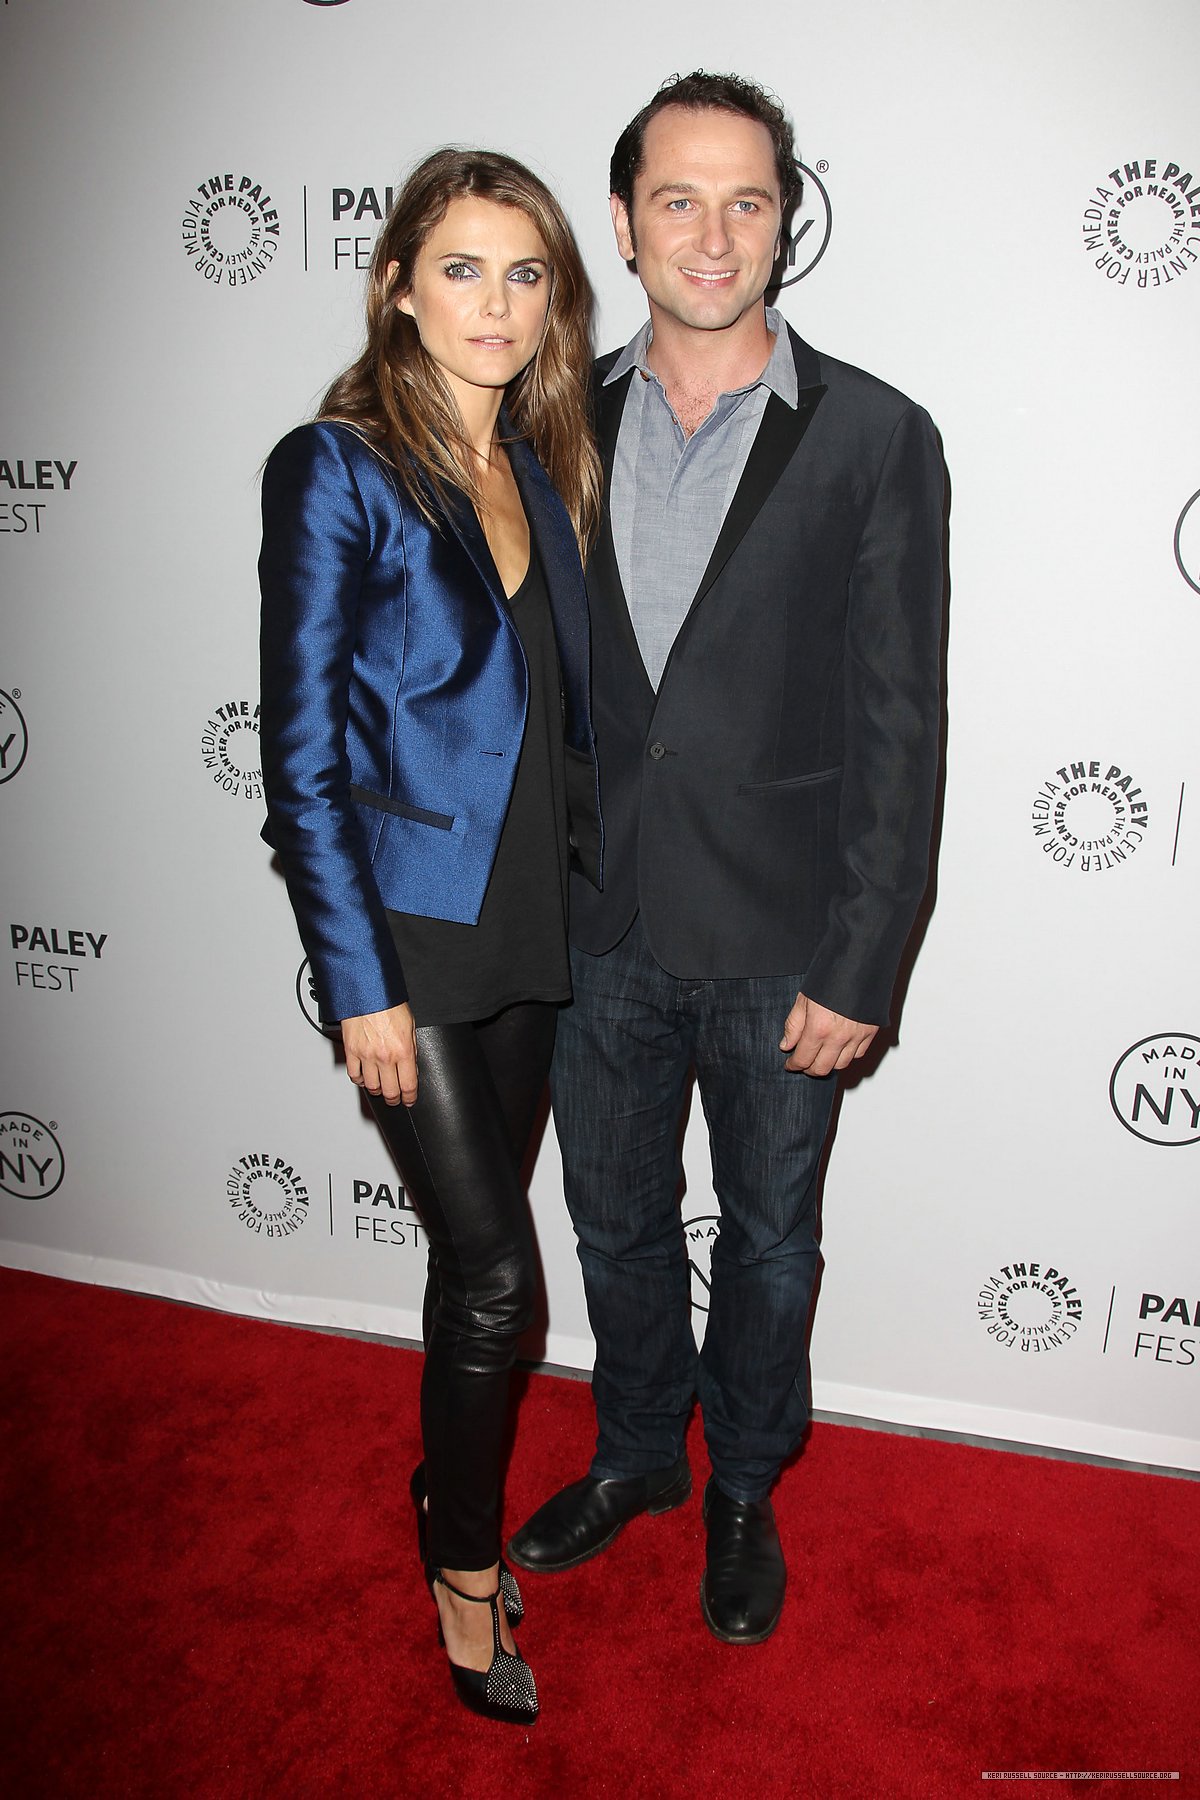 Keri Russell attends 2013 PaleyFest Made In New York The Americans